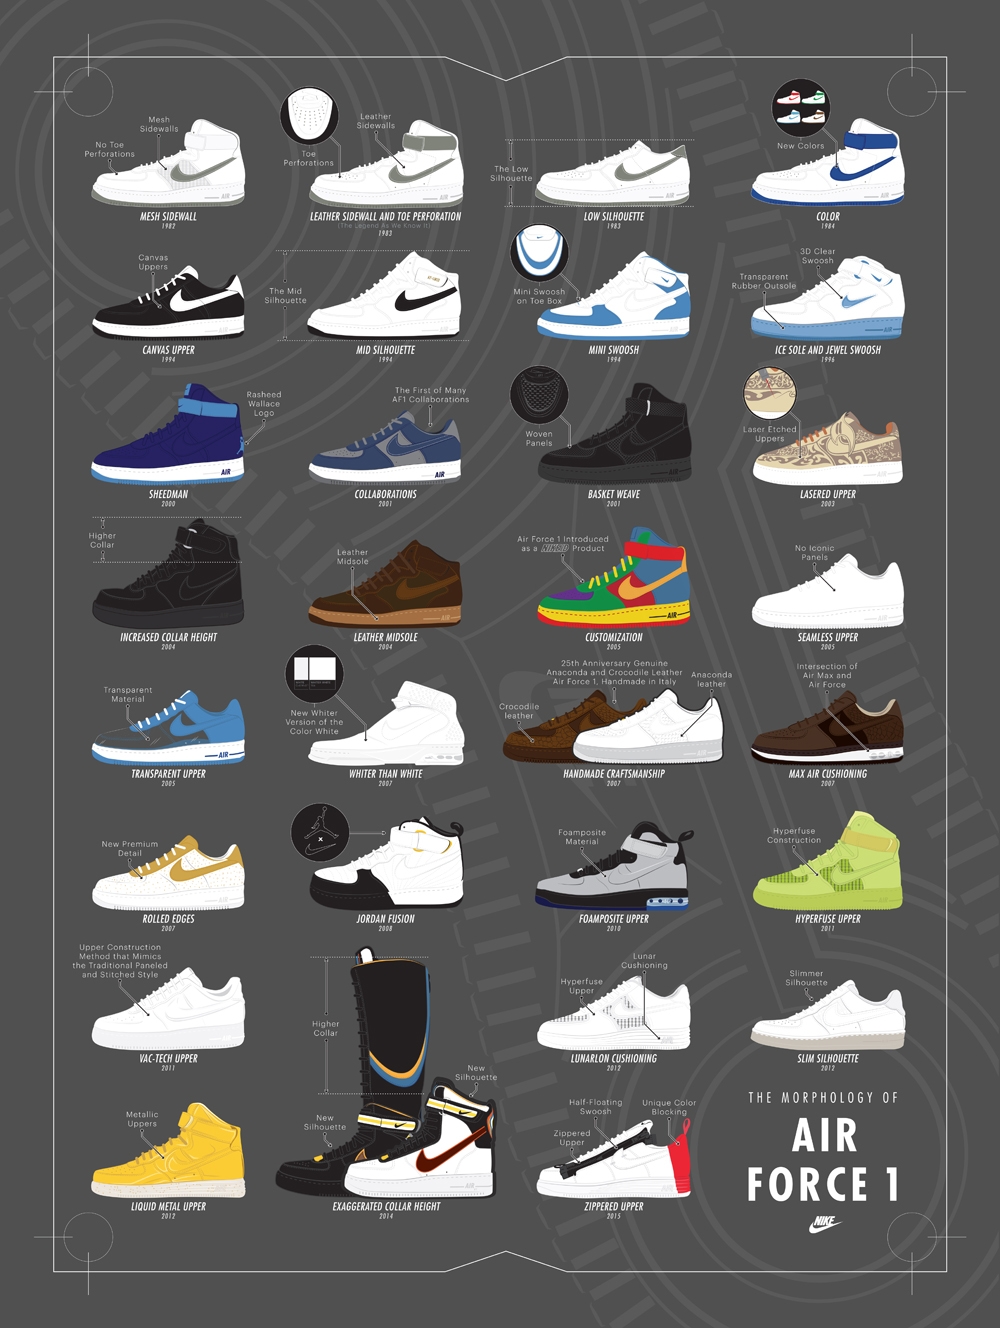 all air force 1 models